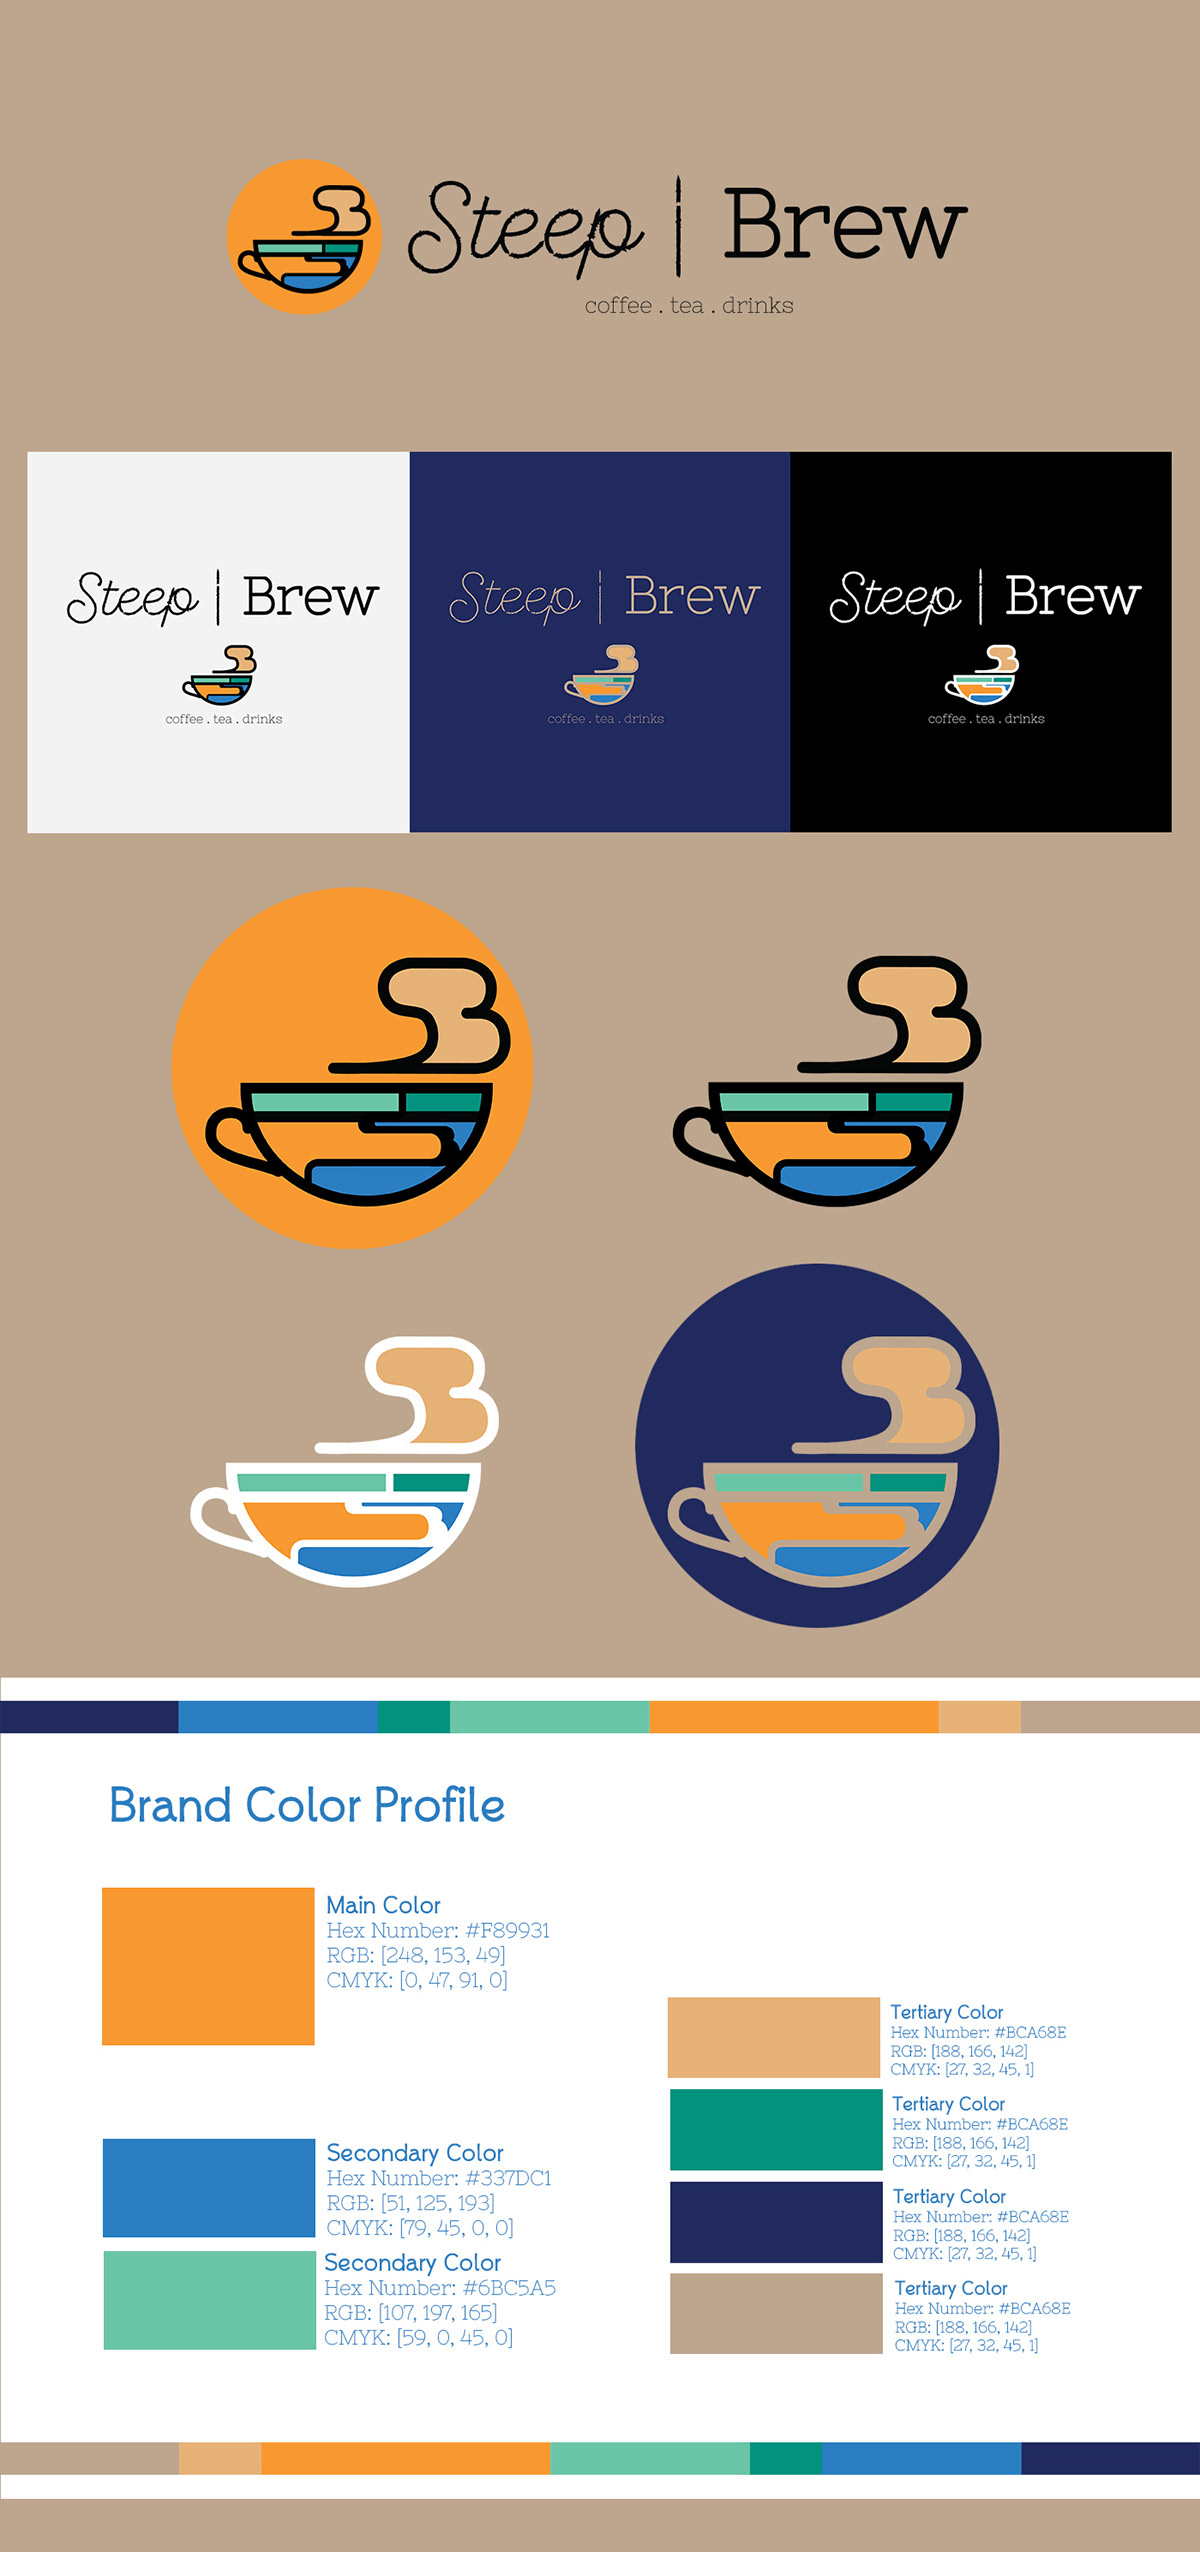 iconography typography   branding  Style Guide coffee shop logo Social Media Headers graphic design  visual design